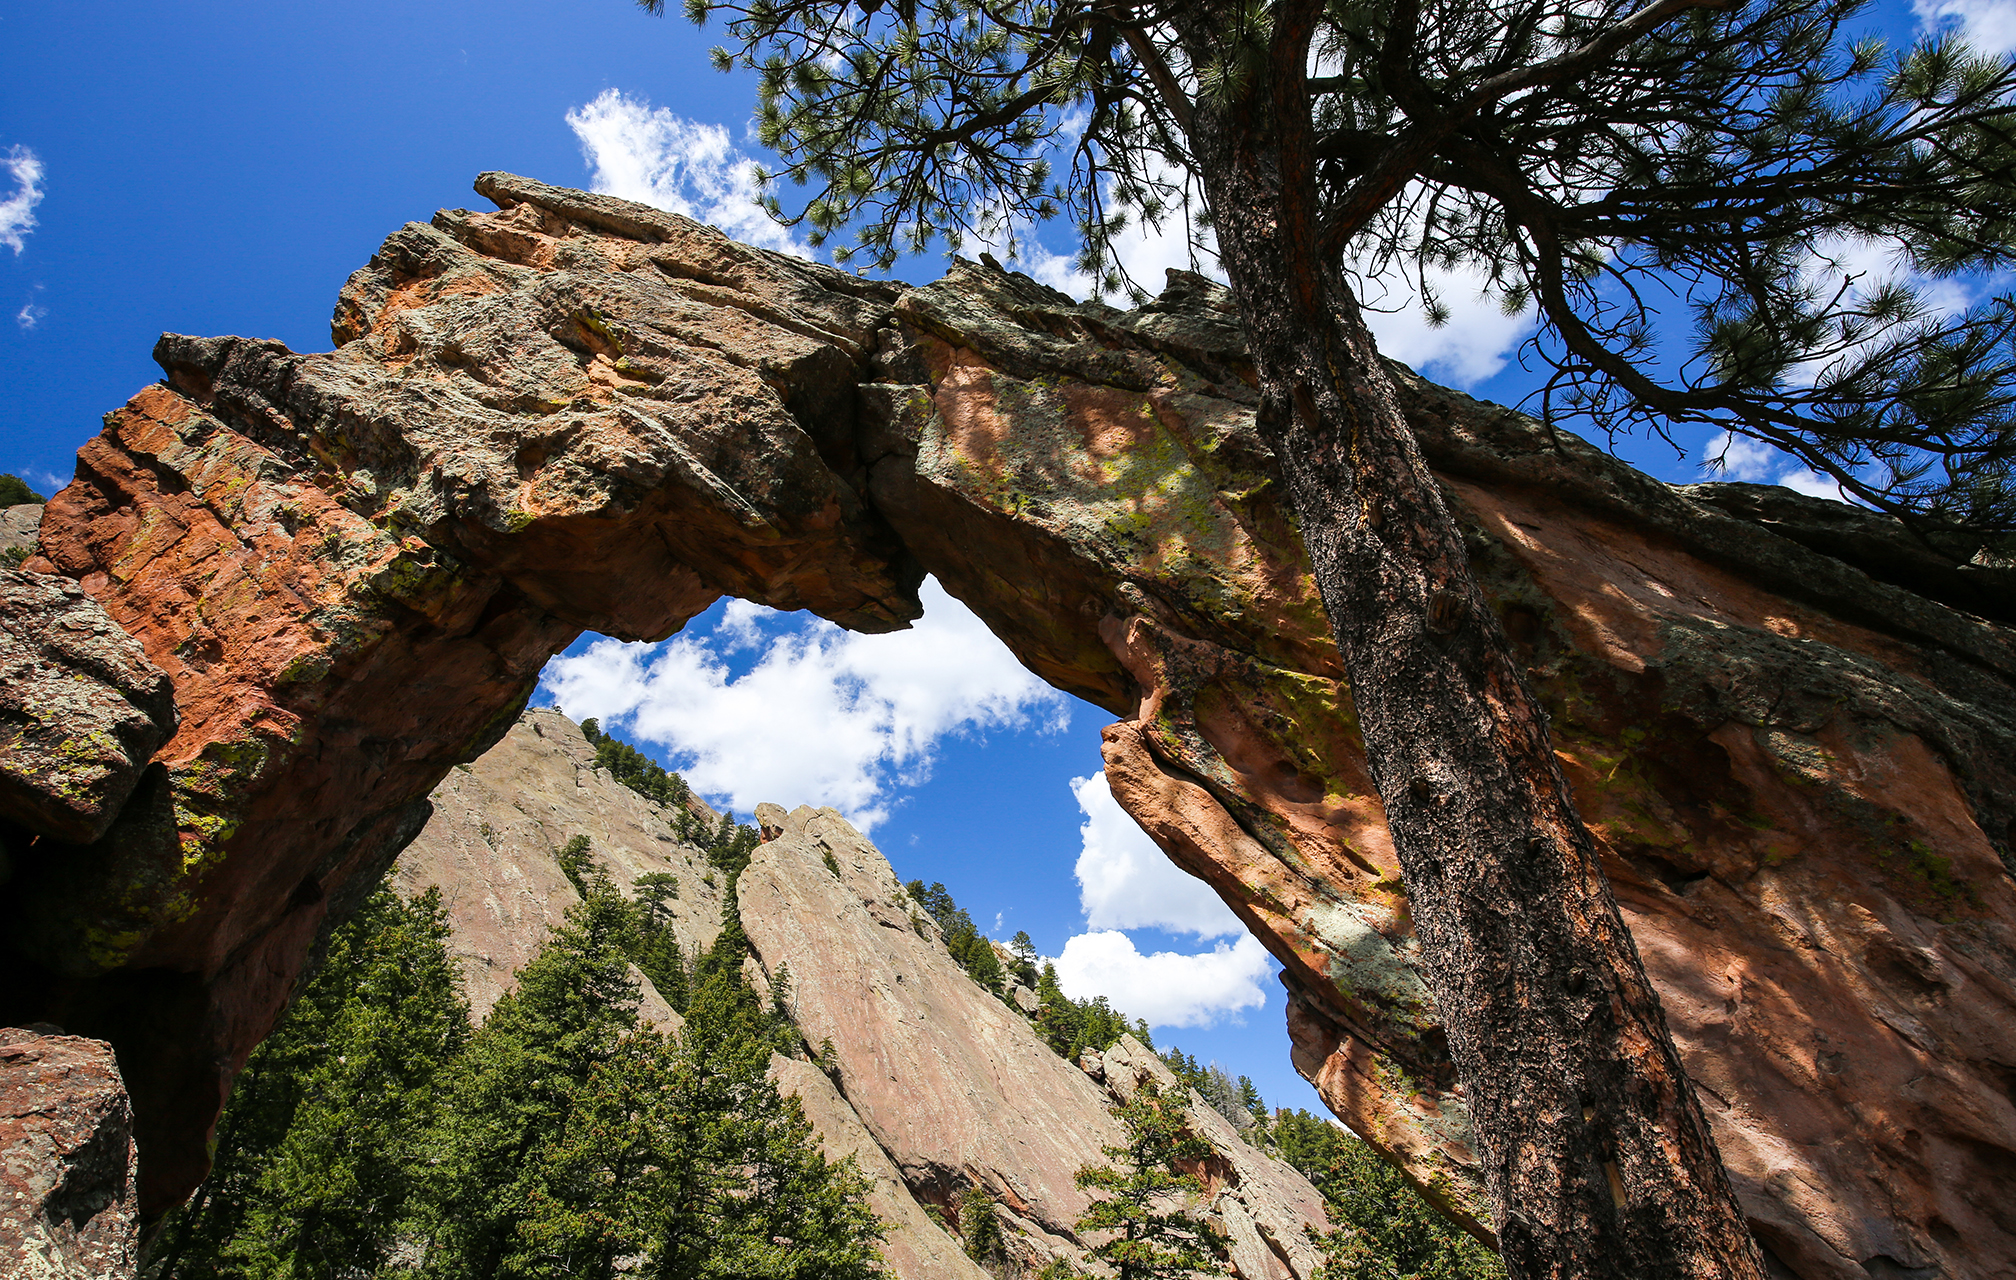 Royal arch rock formation, a large rock arch with trees and a blue sky